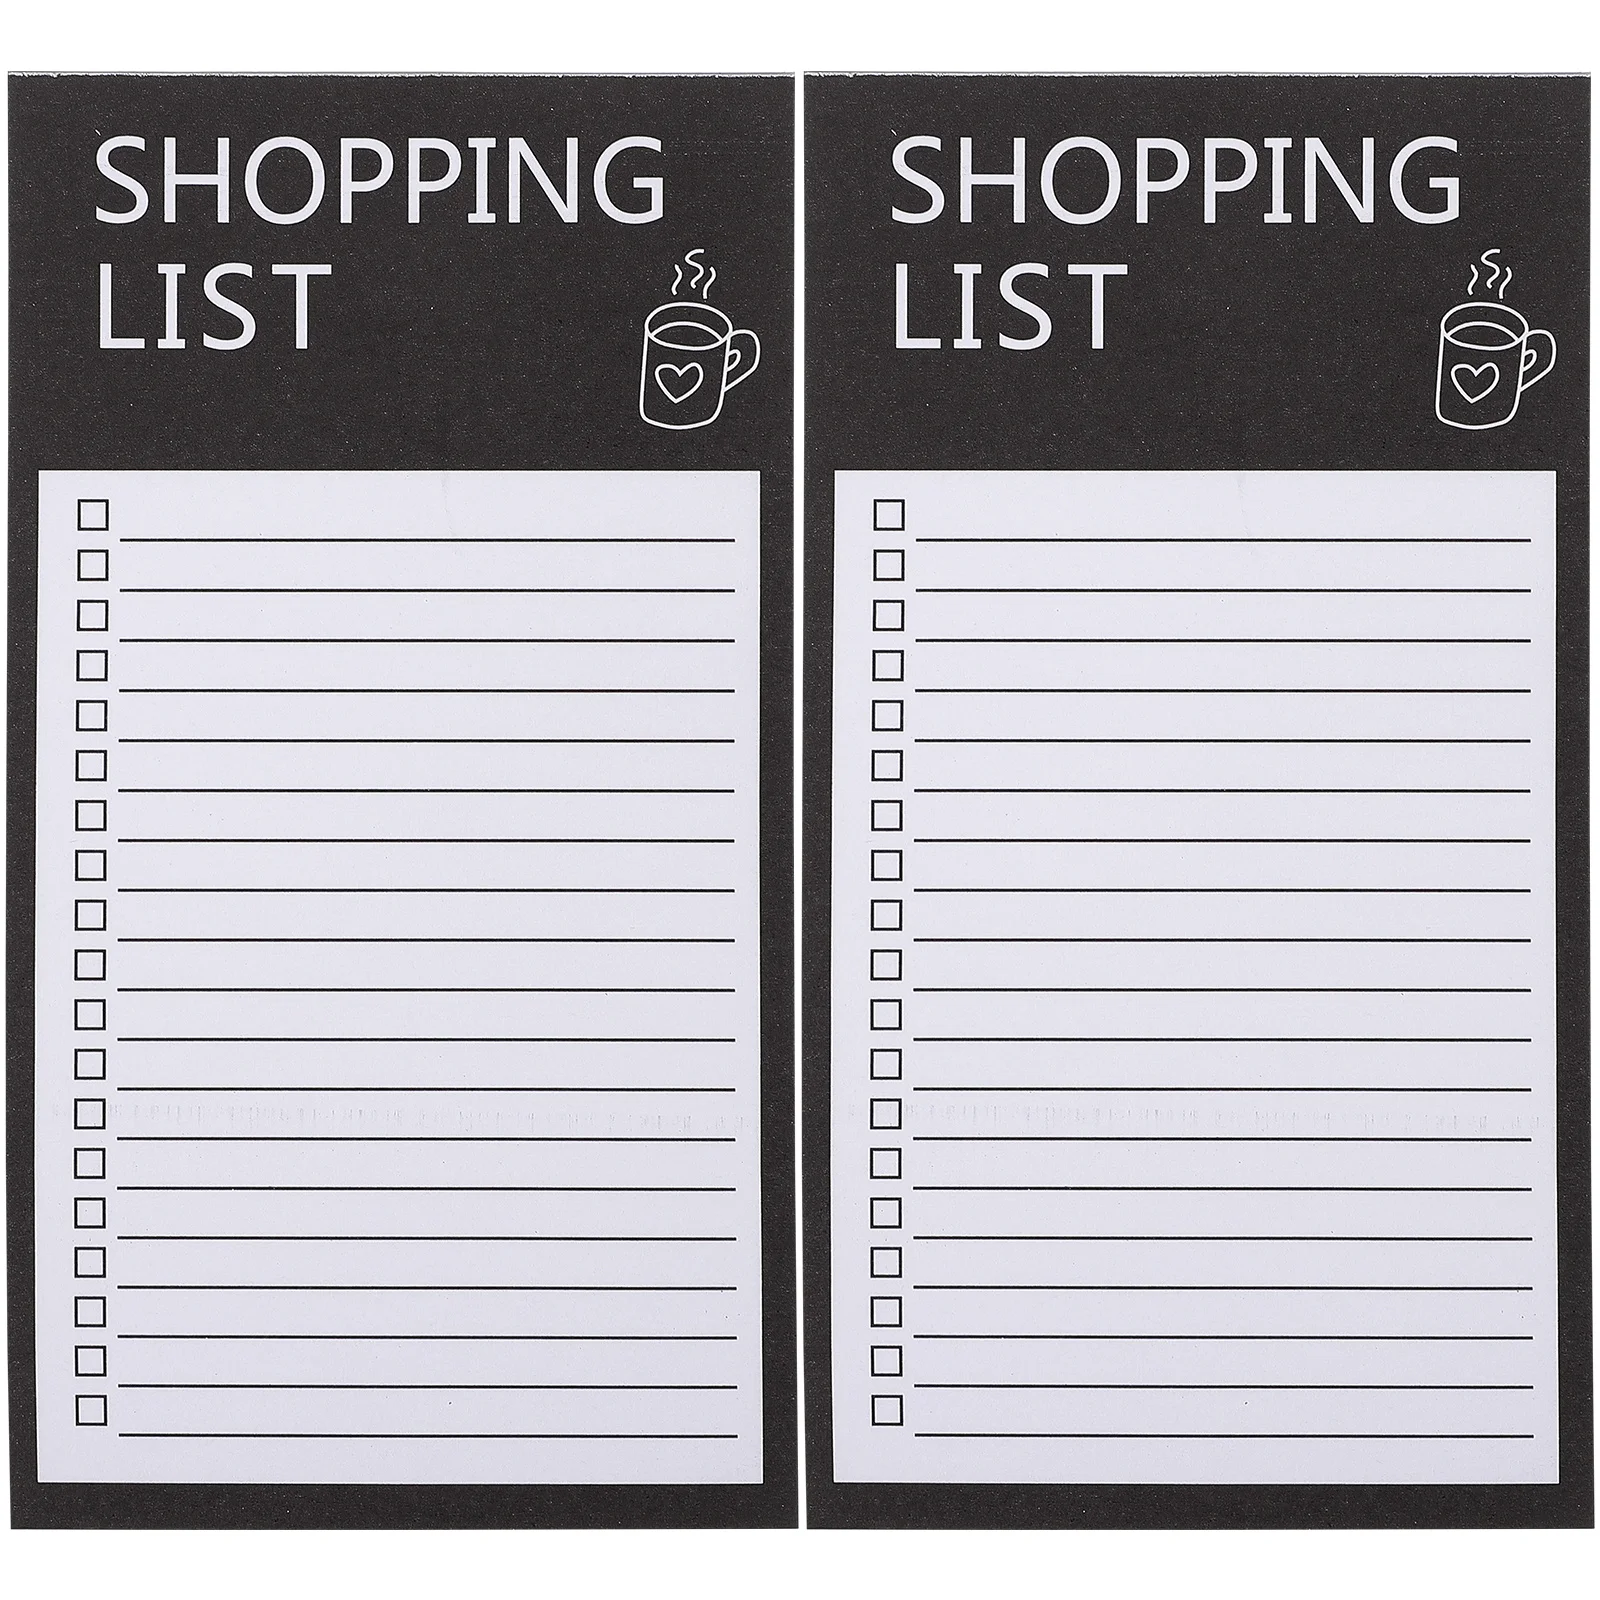 Fridge Magnetic Notepads Memo Pads To Do List Shopping List Planner Grocery Sticker Message Board Notes Planning Notebook